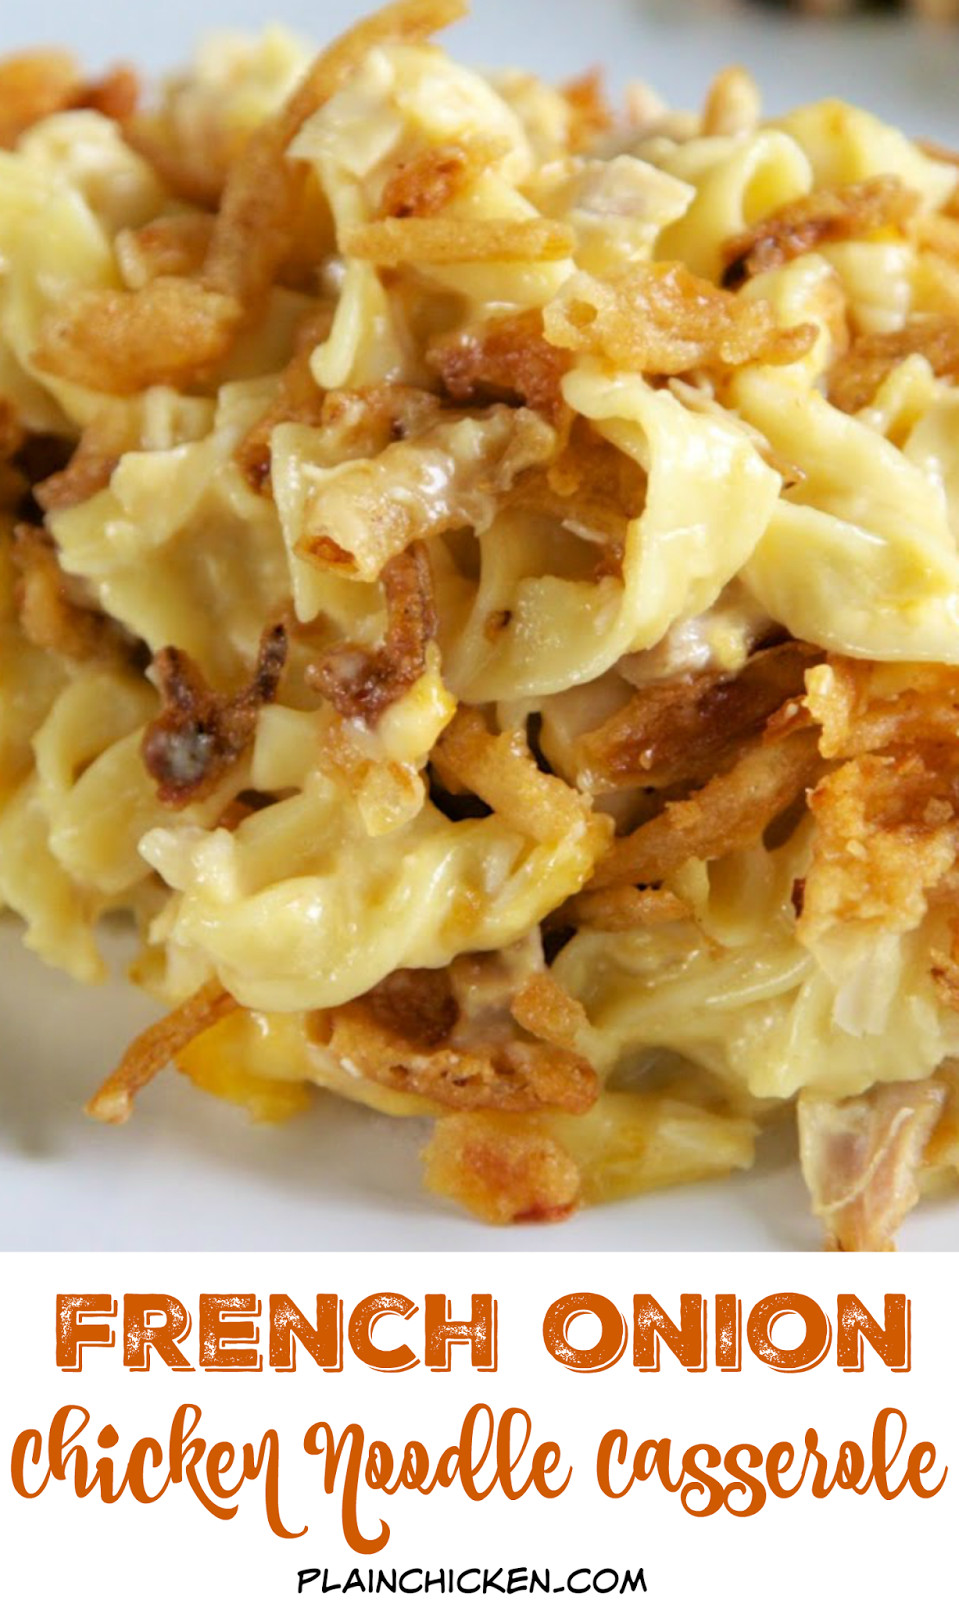 Chicken Egg Noodle Casserole Recipes
 French ion Chicken Noodle Casserole